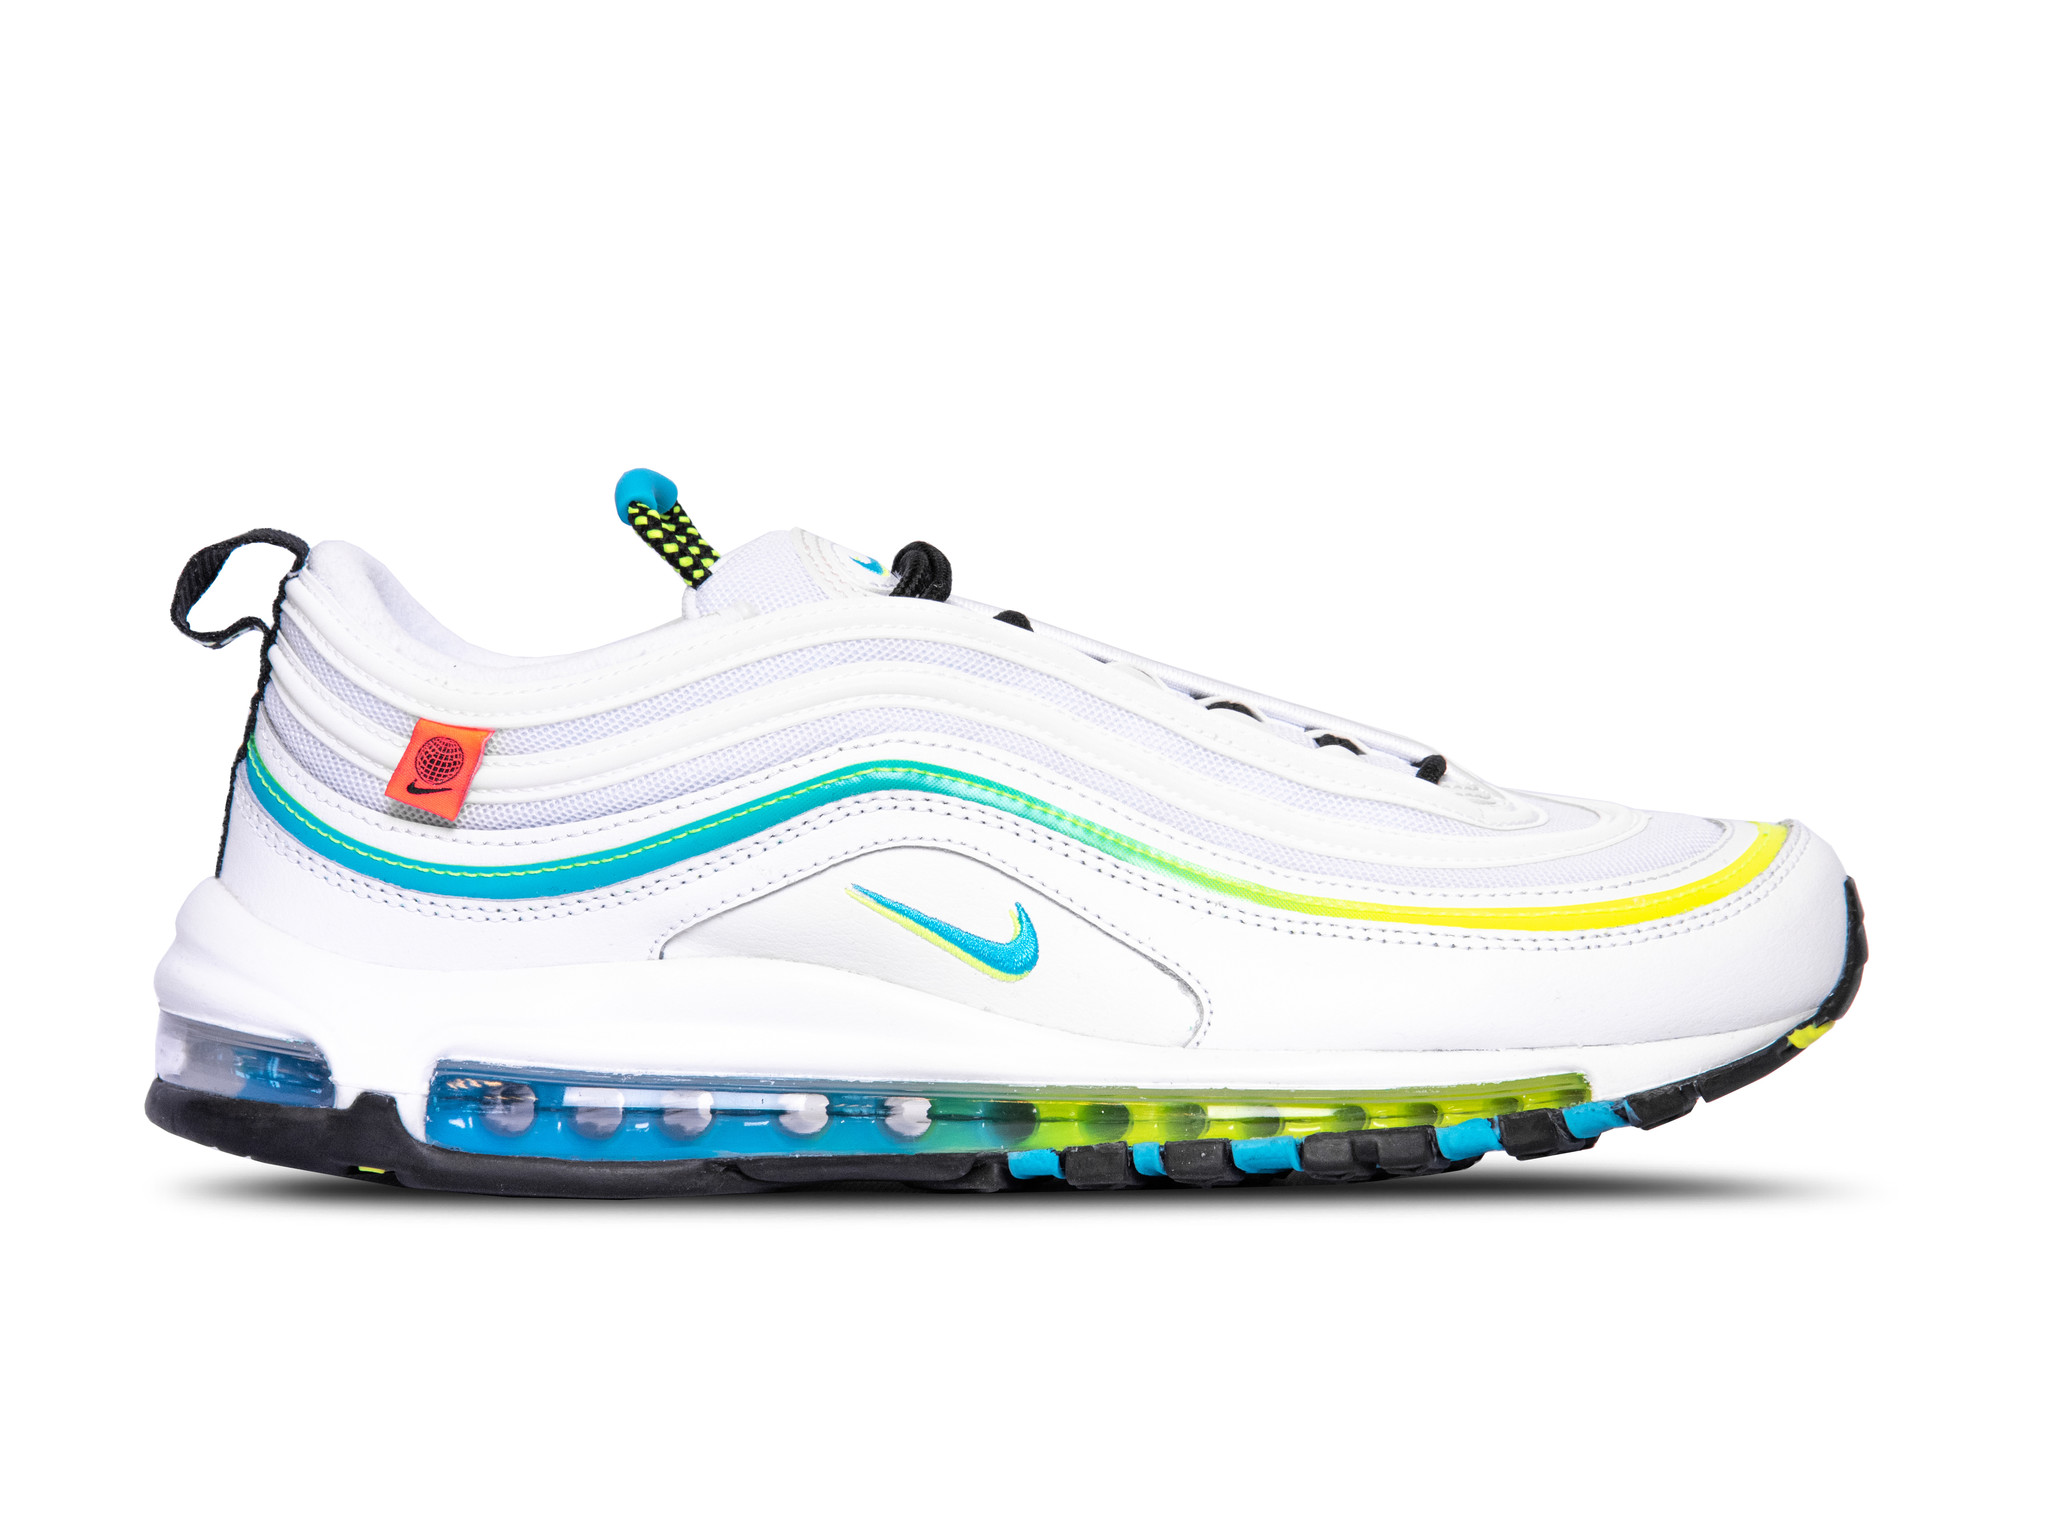 nike air max 97 we casual shoes